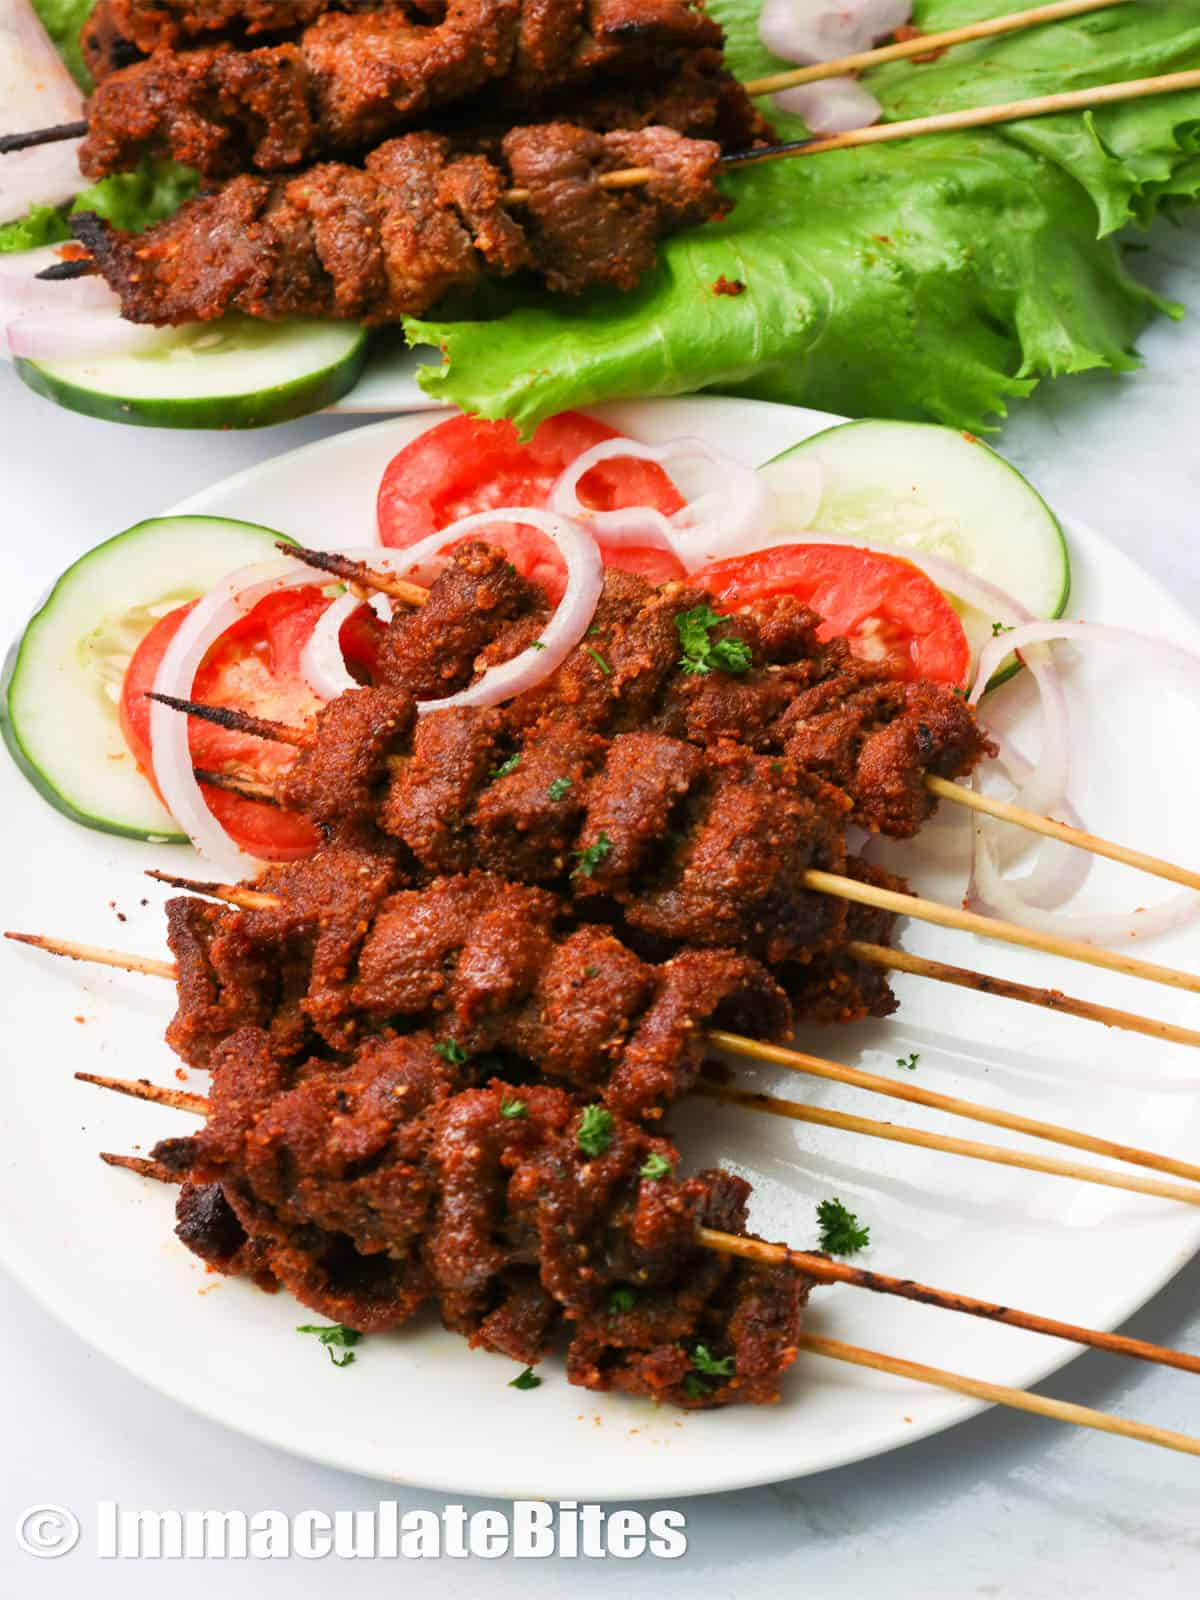 plated suya beef with cucumber and tomato slices